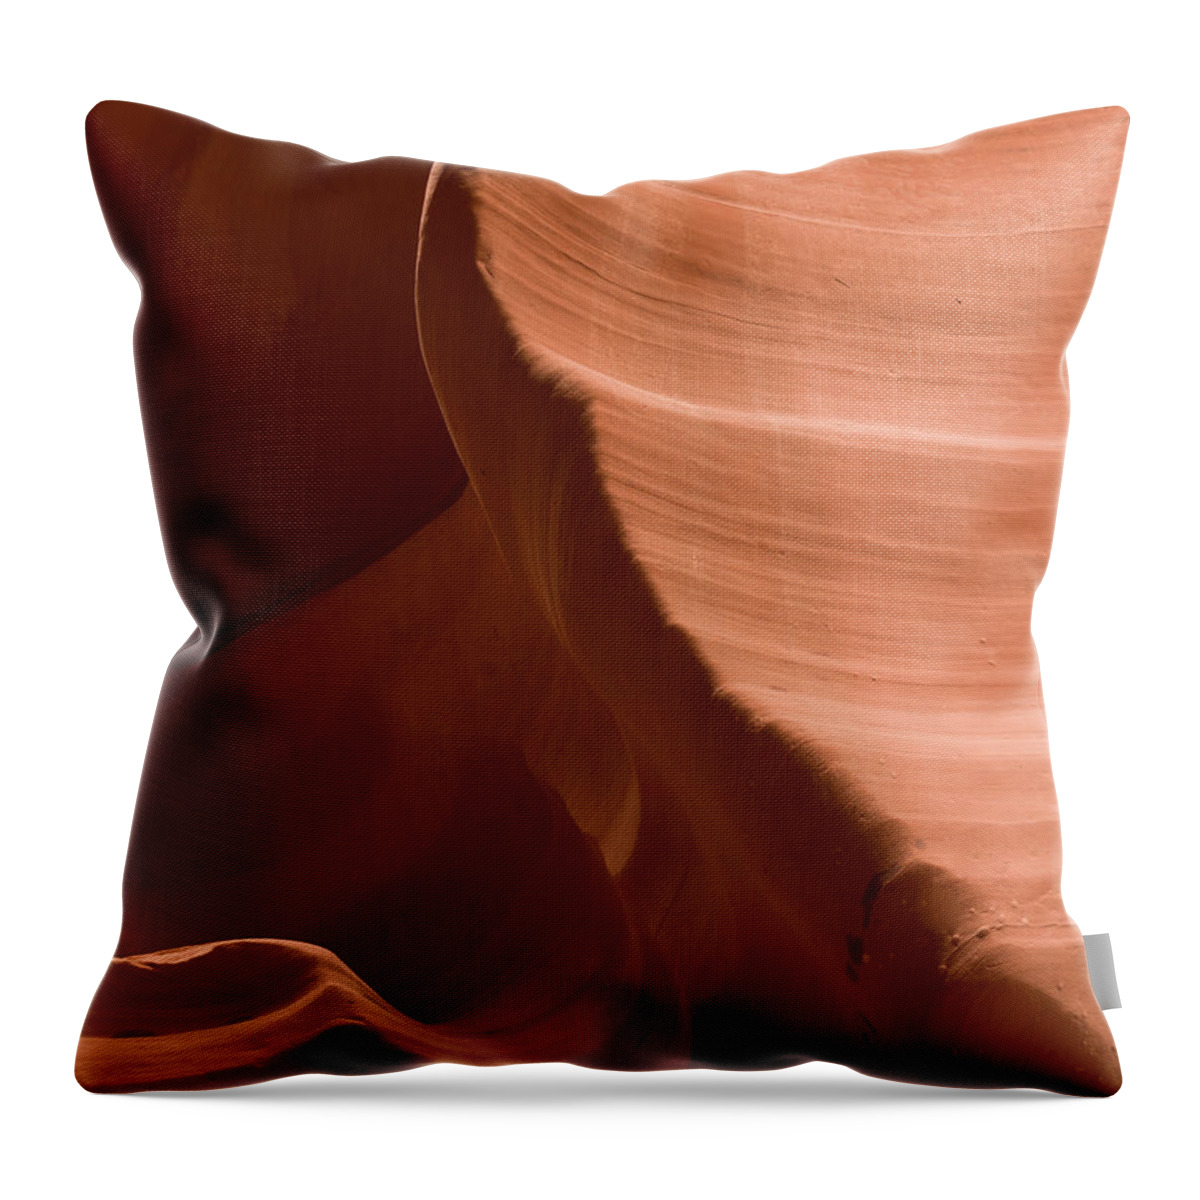 Antelope Canyon Throw Pillow featuring the photograph Patterns In The Smooth Sandstone #1 by Keith Levit / Design Pics